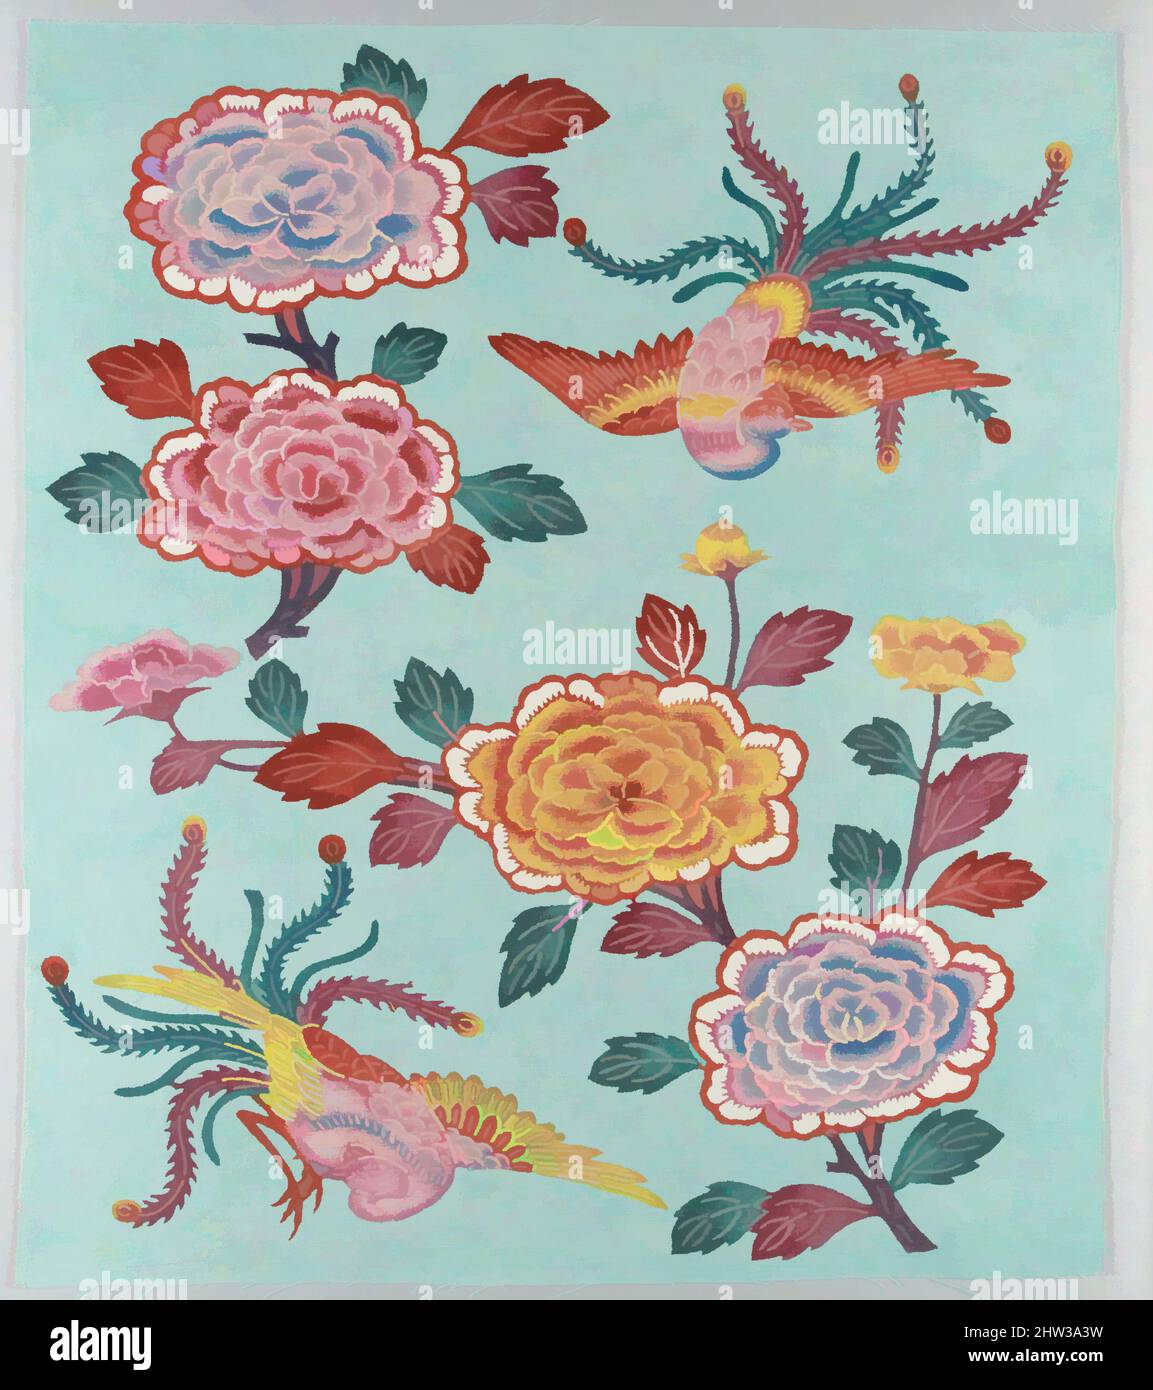 Art inspired by Bingata Panel with Tree Peonies and Peacocks, 20th century, Japan (Ryūkyū Islands), Cotton tabby, 17 x 14 1/2 in. (43.2 x 36.8 cm), Textiles, Mrs. Teruyo Shinohara and her pupils, Classic works modernized by Artotop with a splash of modernity. Shapes, color and value, eye-catching visual impact on art. Emotions through freedom of artworks in a contemporary way. A timeless message pursuing a wildly creative new direction. Artists turning to the digital medium and creating the Artotop NFT Stock Photo